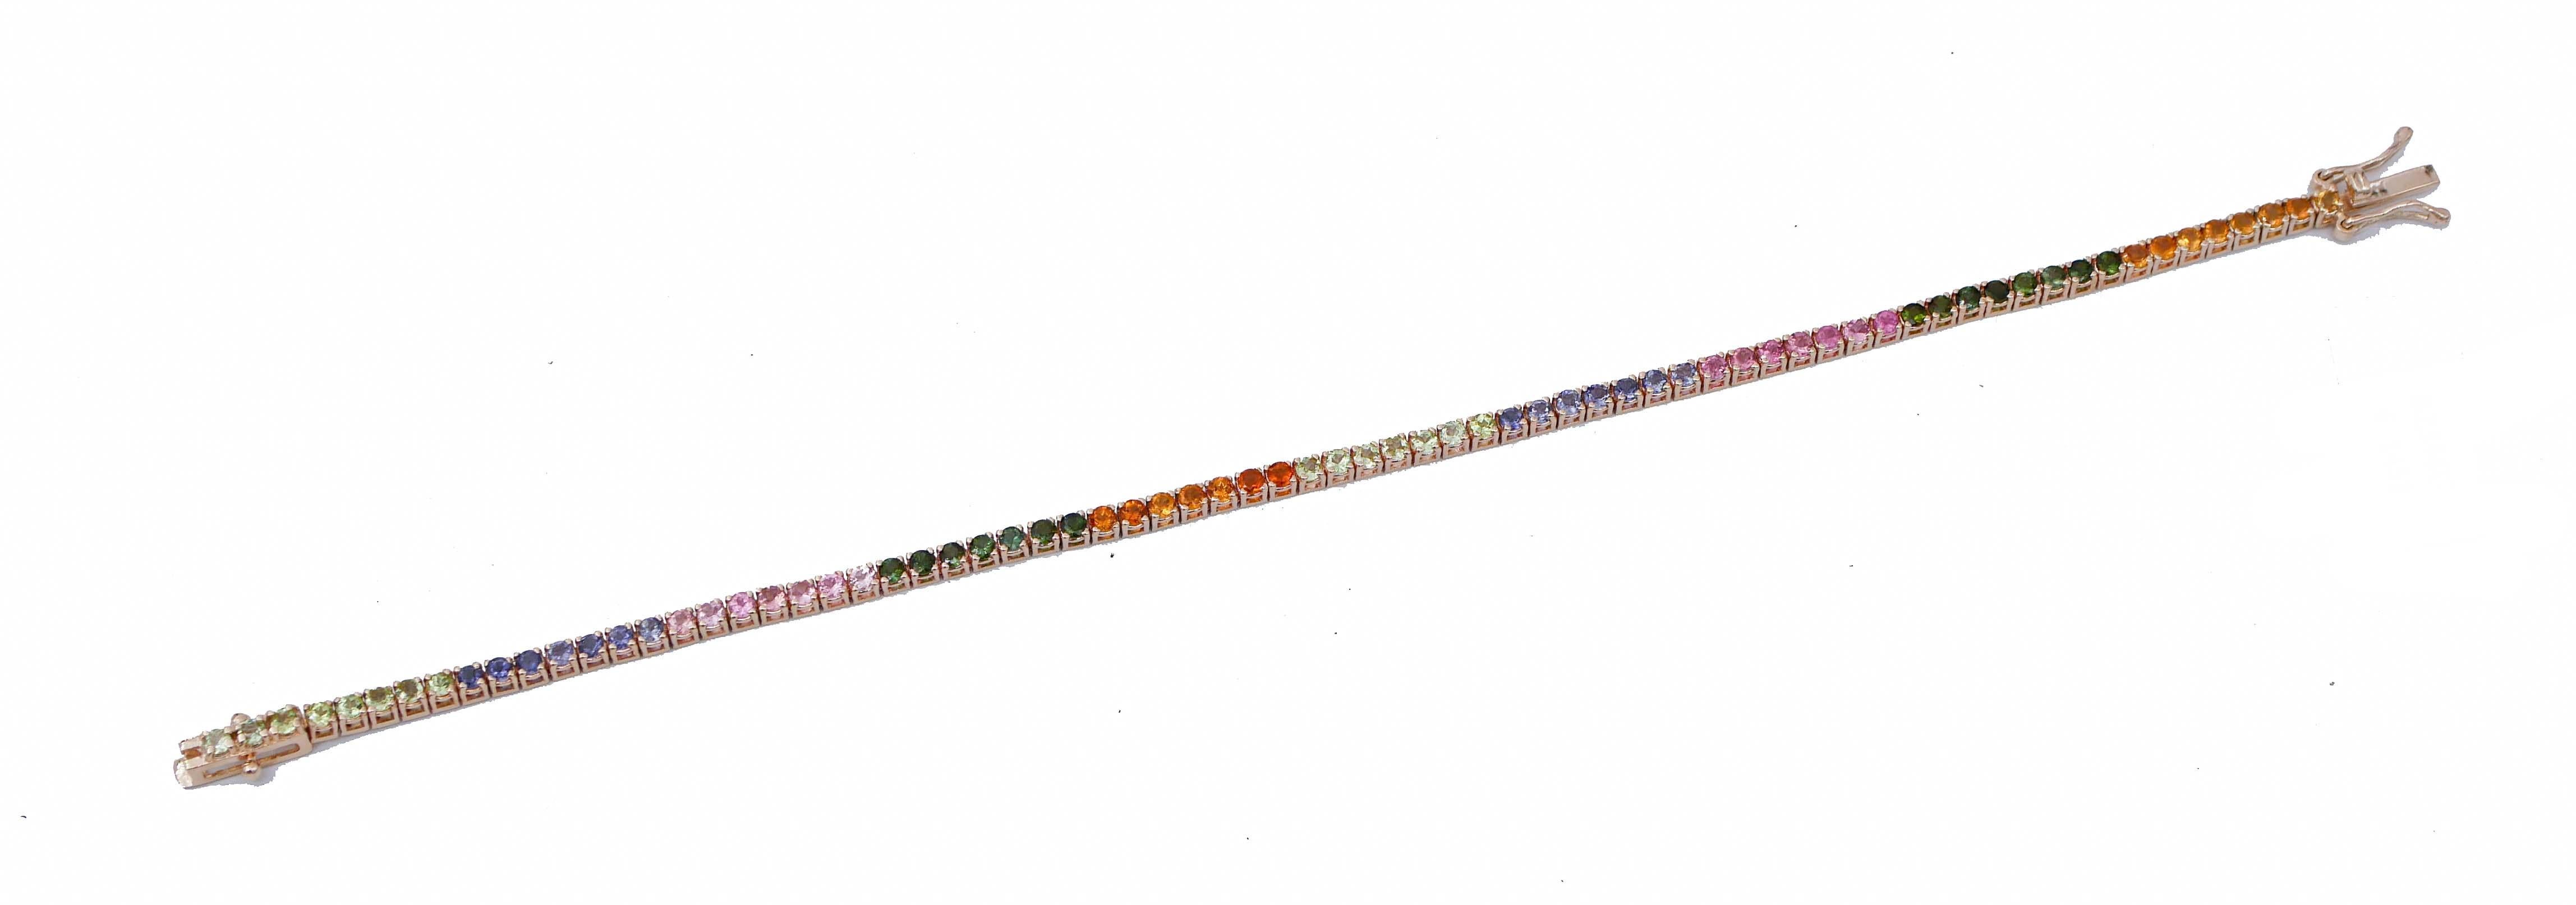 SHIPPING POLICY:
Shipping costs will be totally covered by the seller.

Fantastic tennis bracelet in 9 kt rose gold structure mounted with sections of tourmaline,topazs,iolite and amethysts.
Toumarline,Topazs,Amethysts,Garnets 3.08 ct
Total Weight